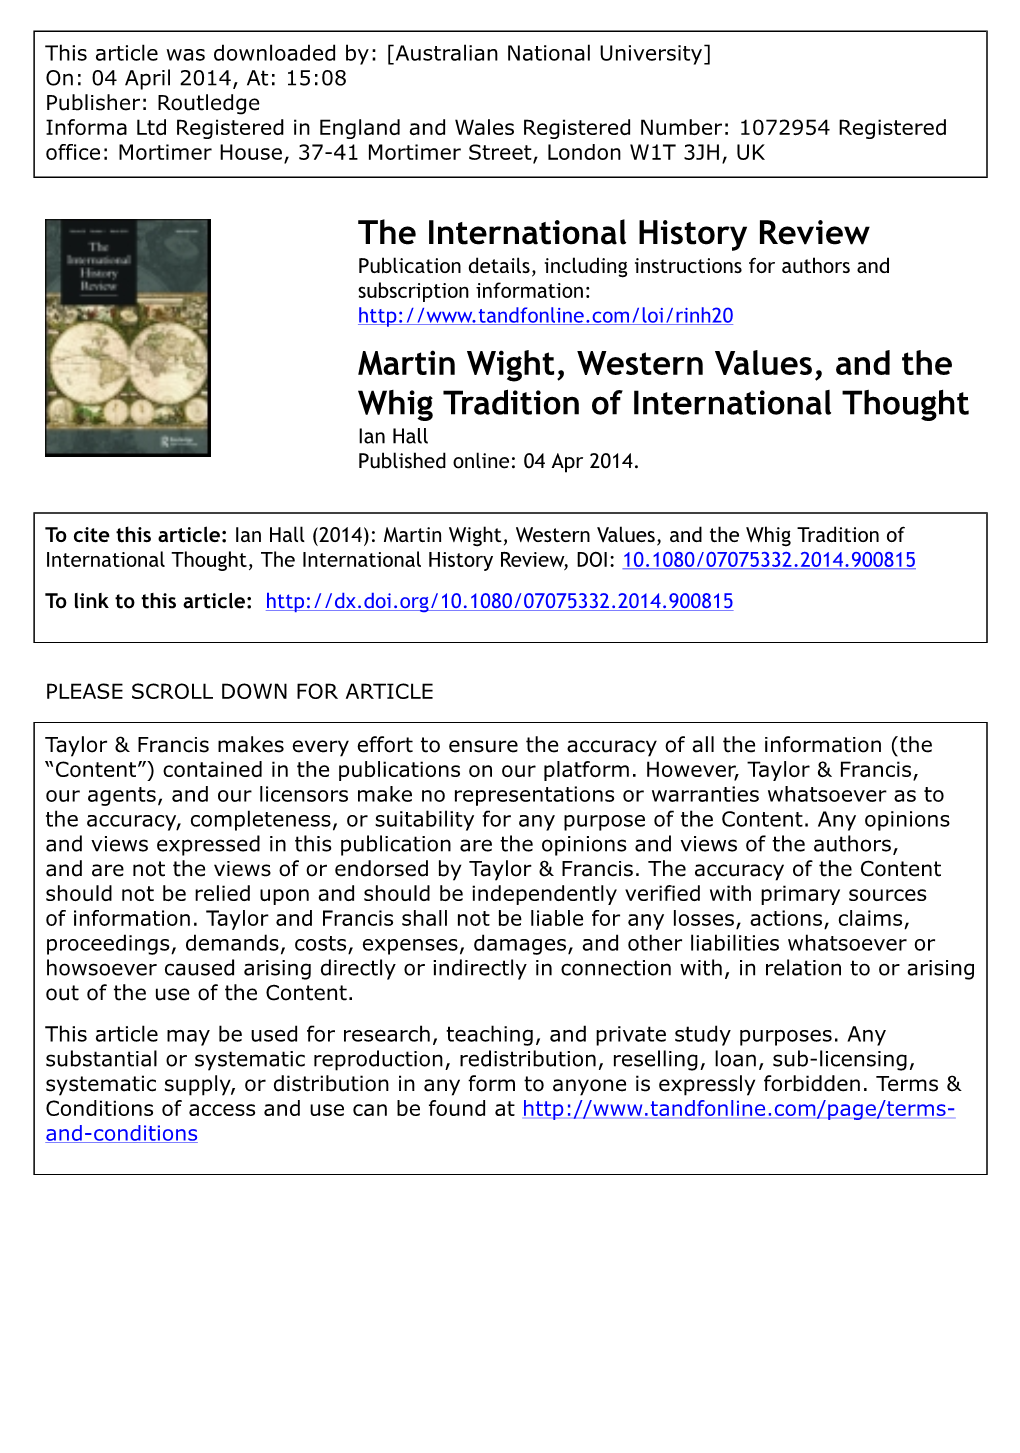 Martin Wight, Western Values, and the Whig Tradition of International Thought Ian Hall Published Online: 04 Apr 2014